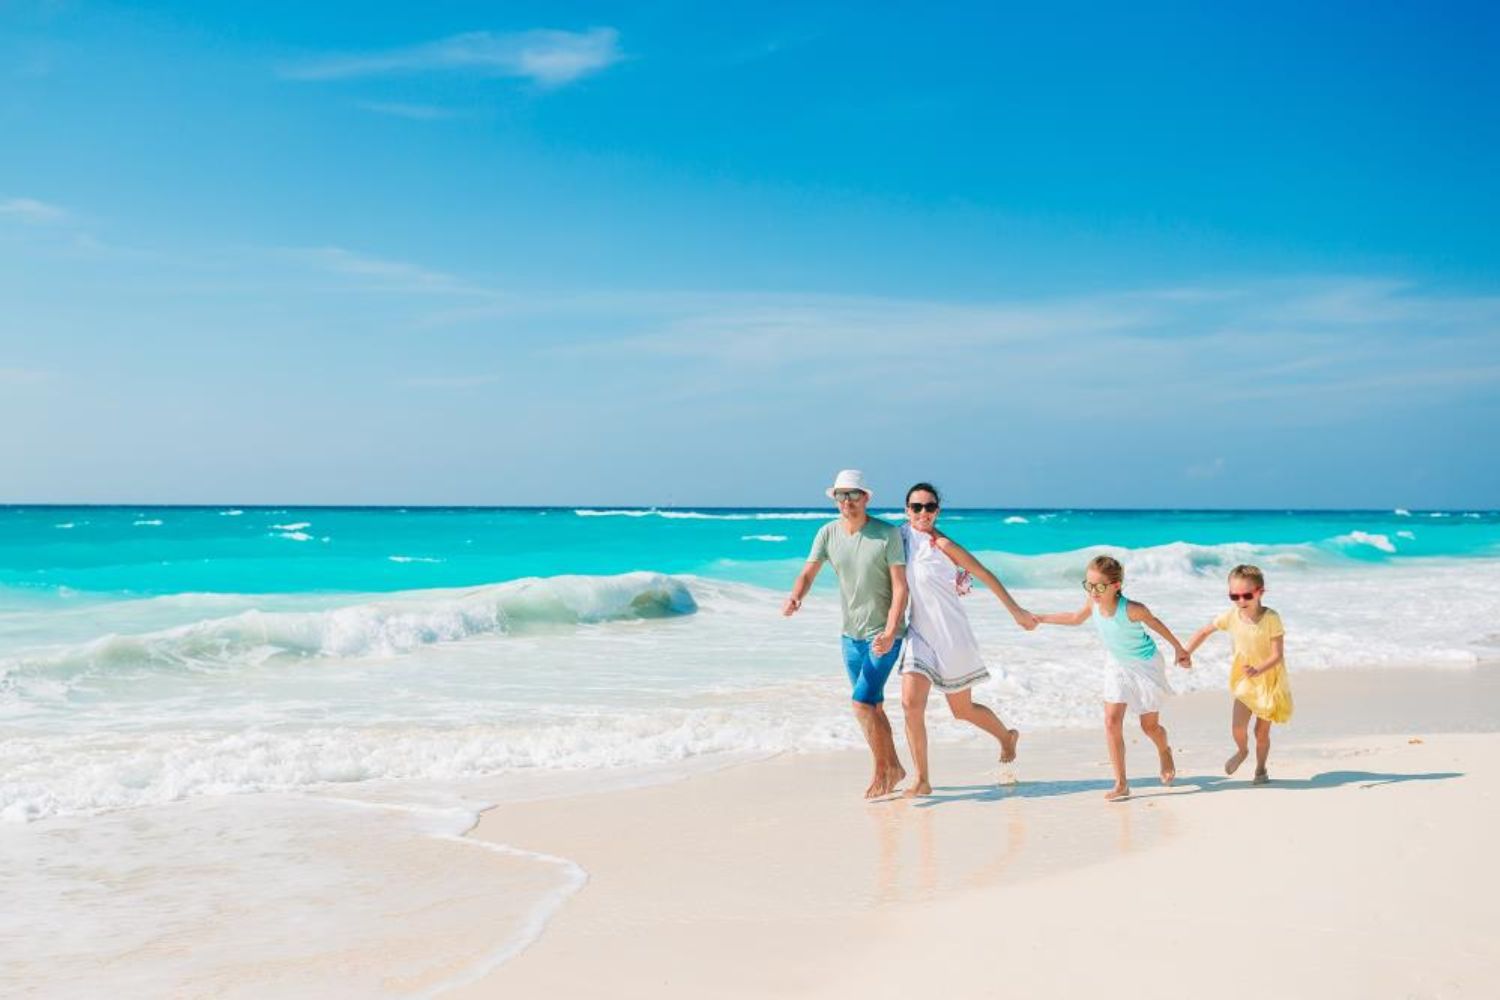 family walking on beach by holding hands